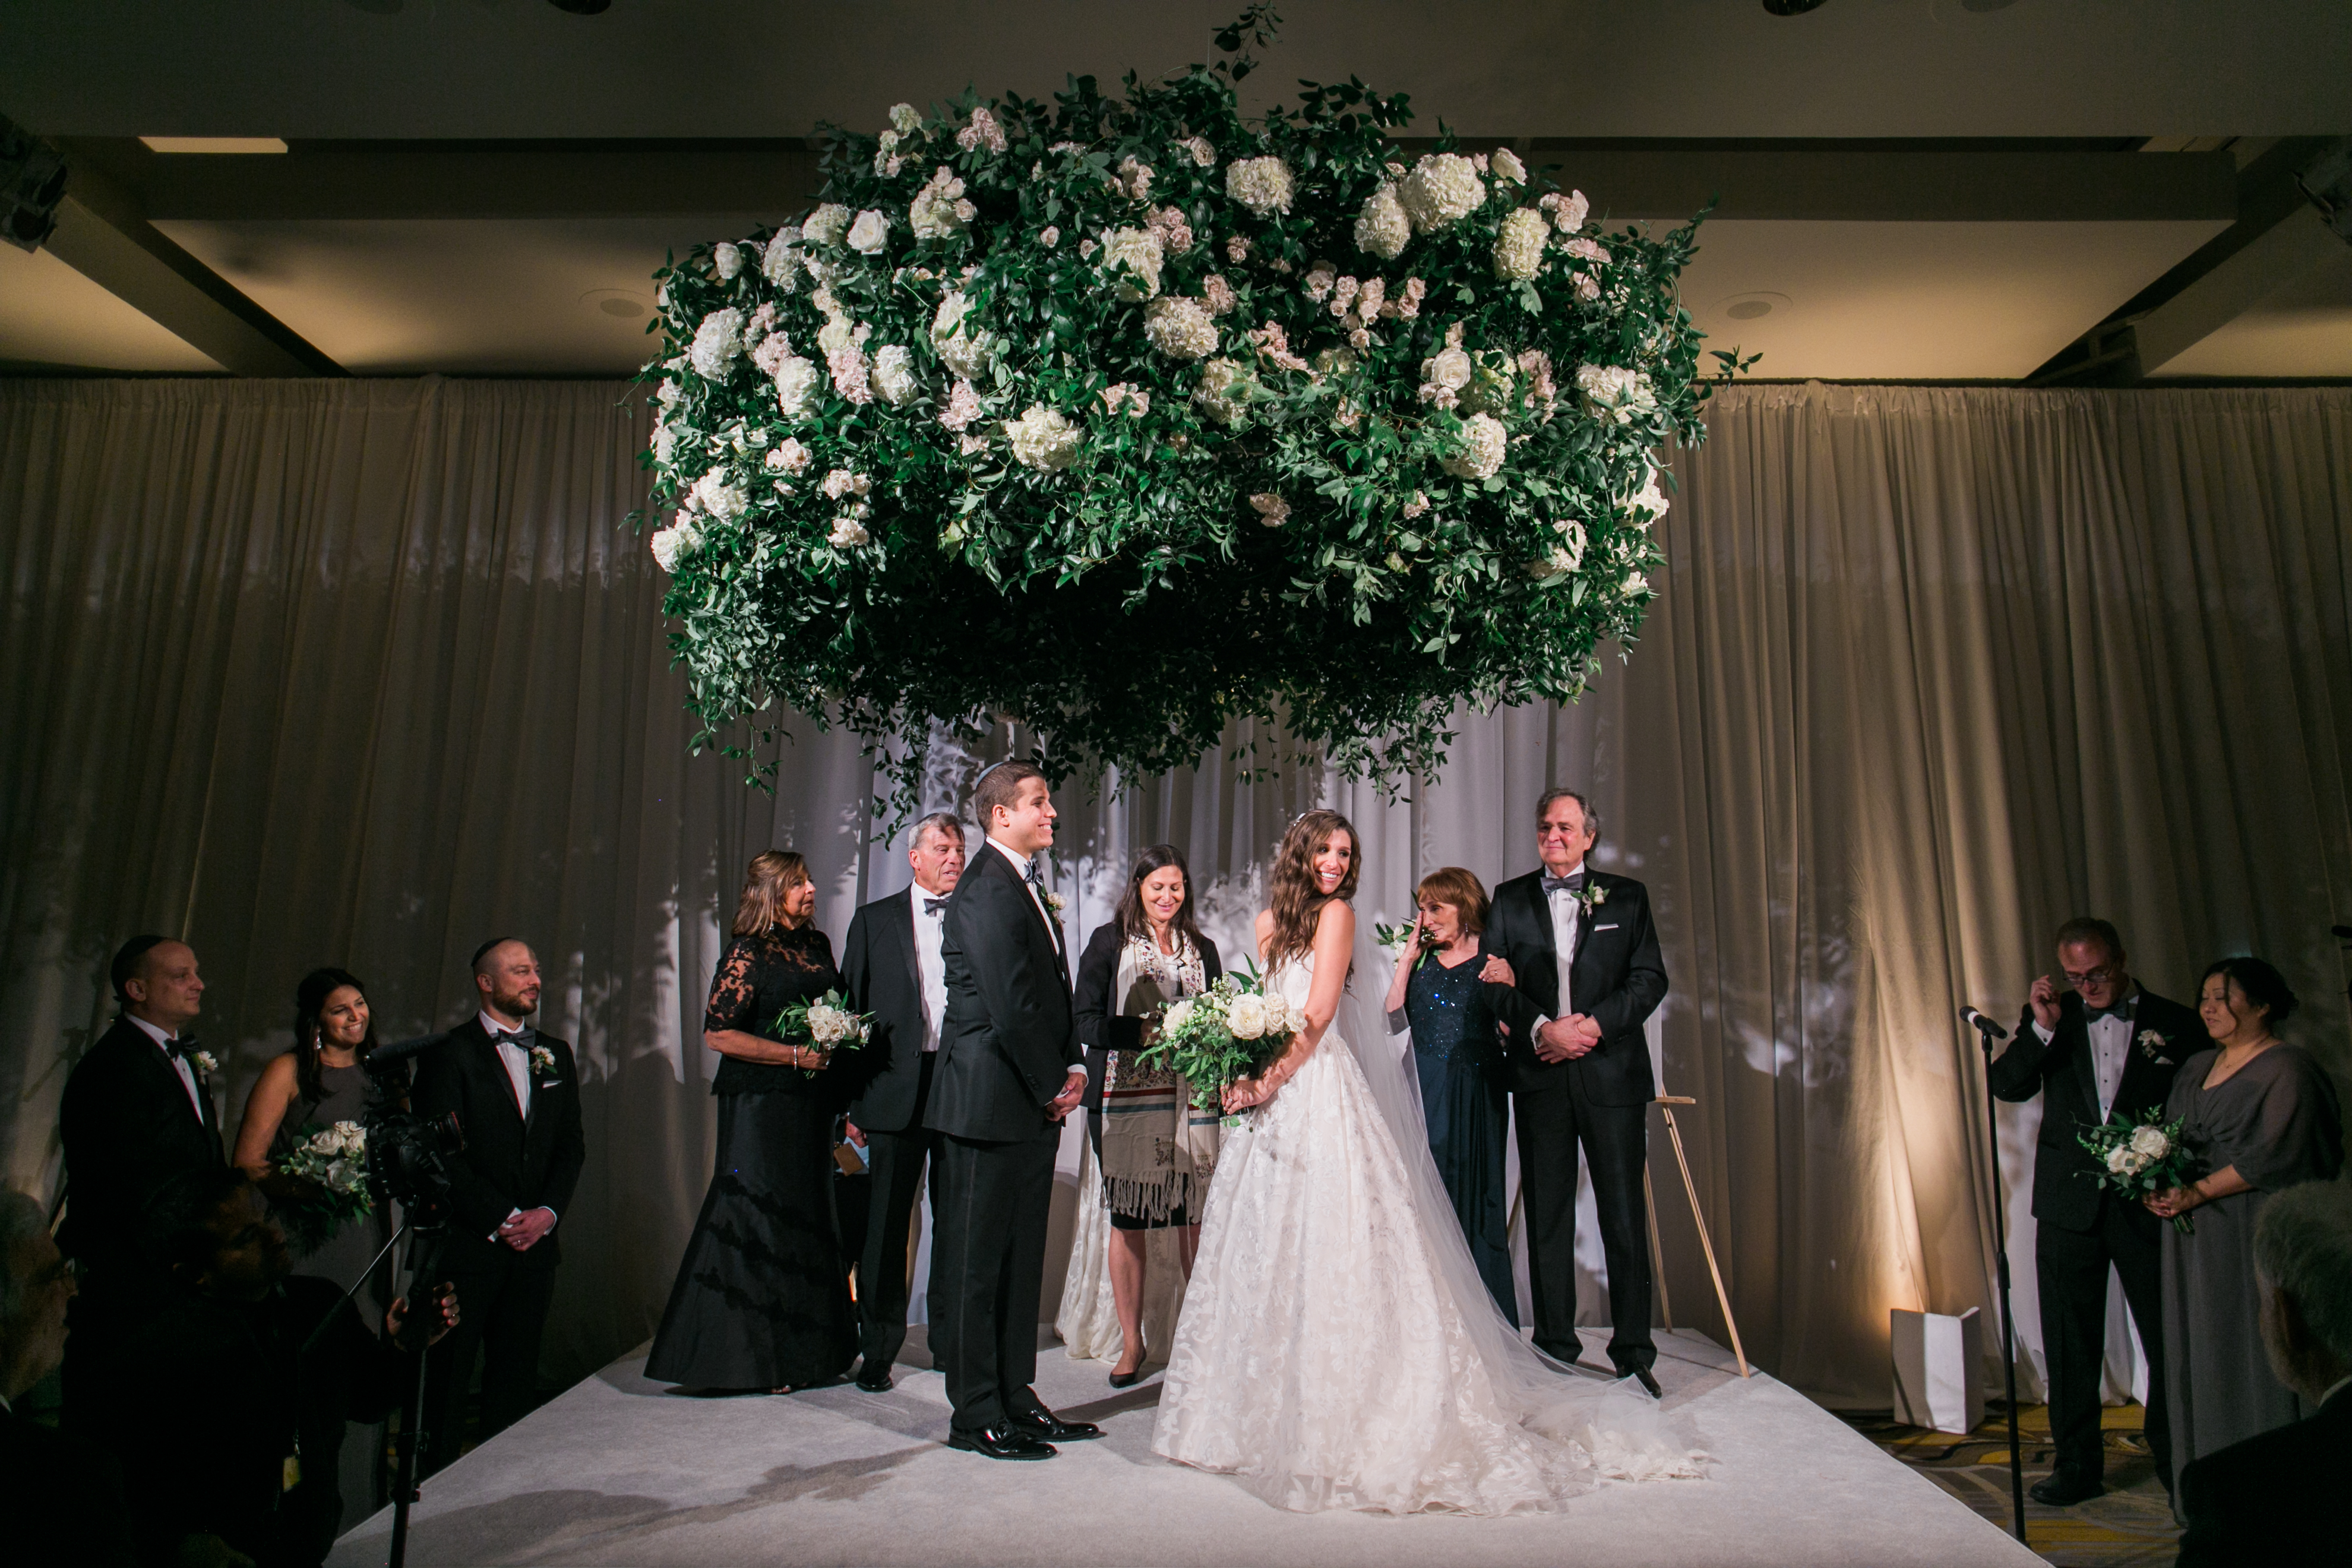 Suspended Chuppah Wedding Ceremony at Four Seasons in Washington, DC